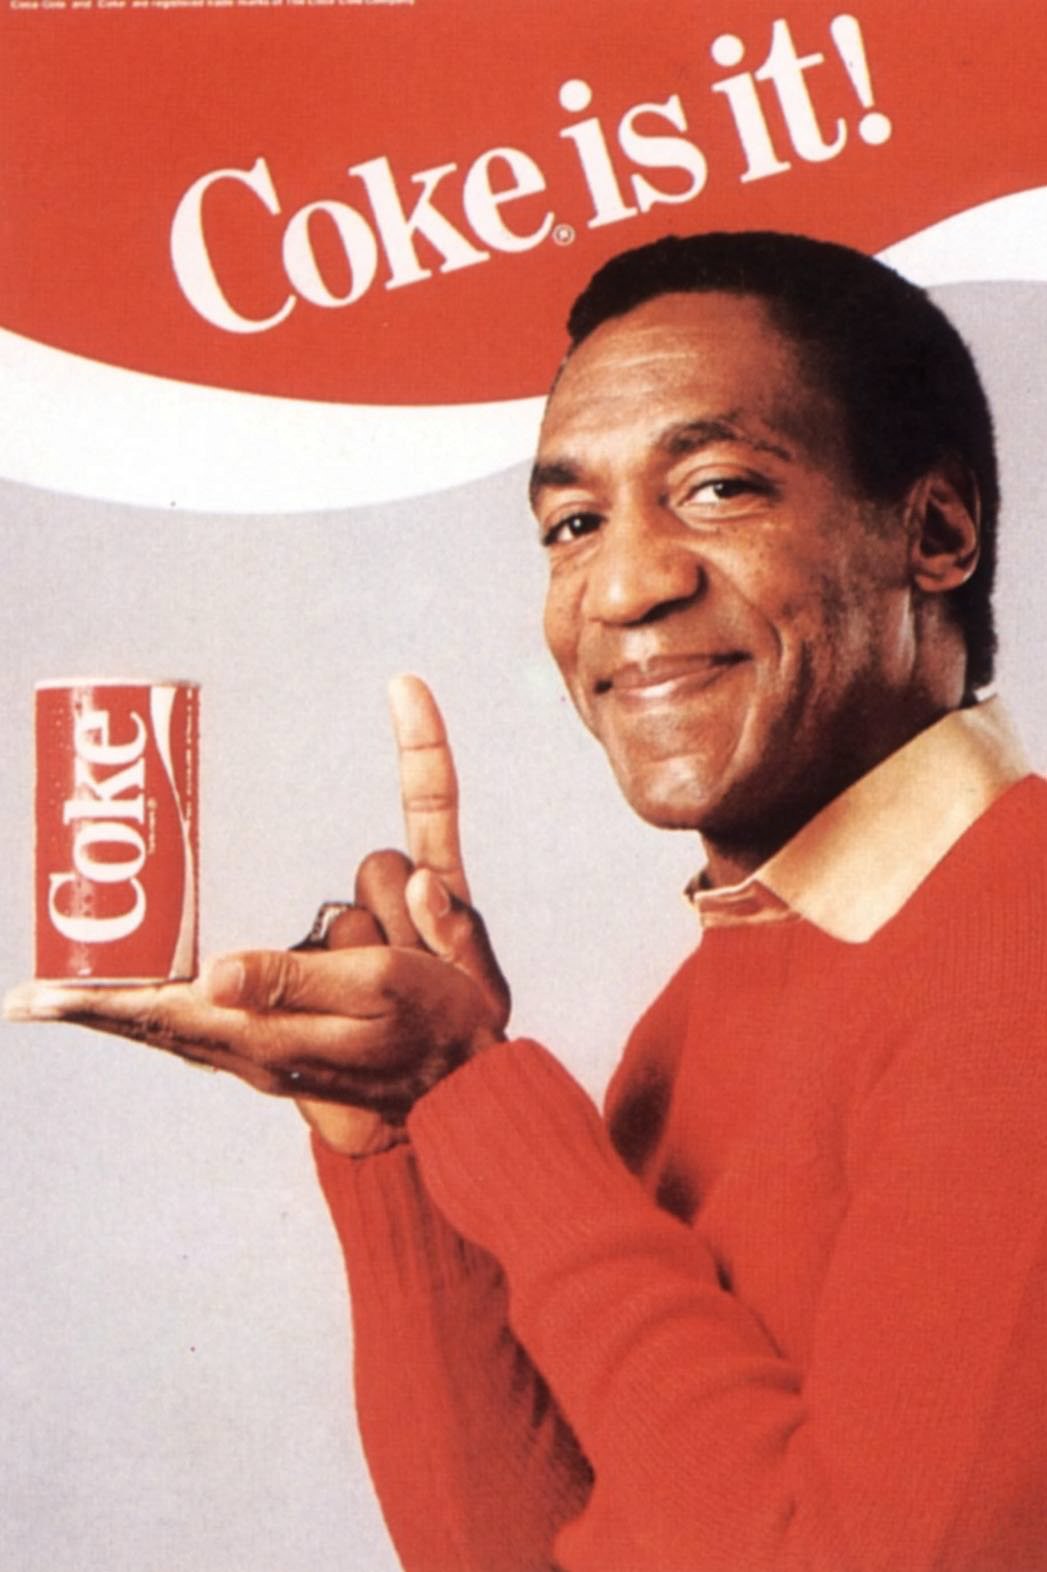 Cosby’s Early Work as a Product Endorser for Jell-O and Many More